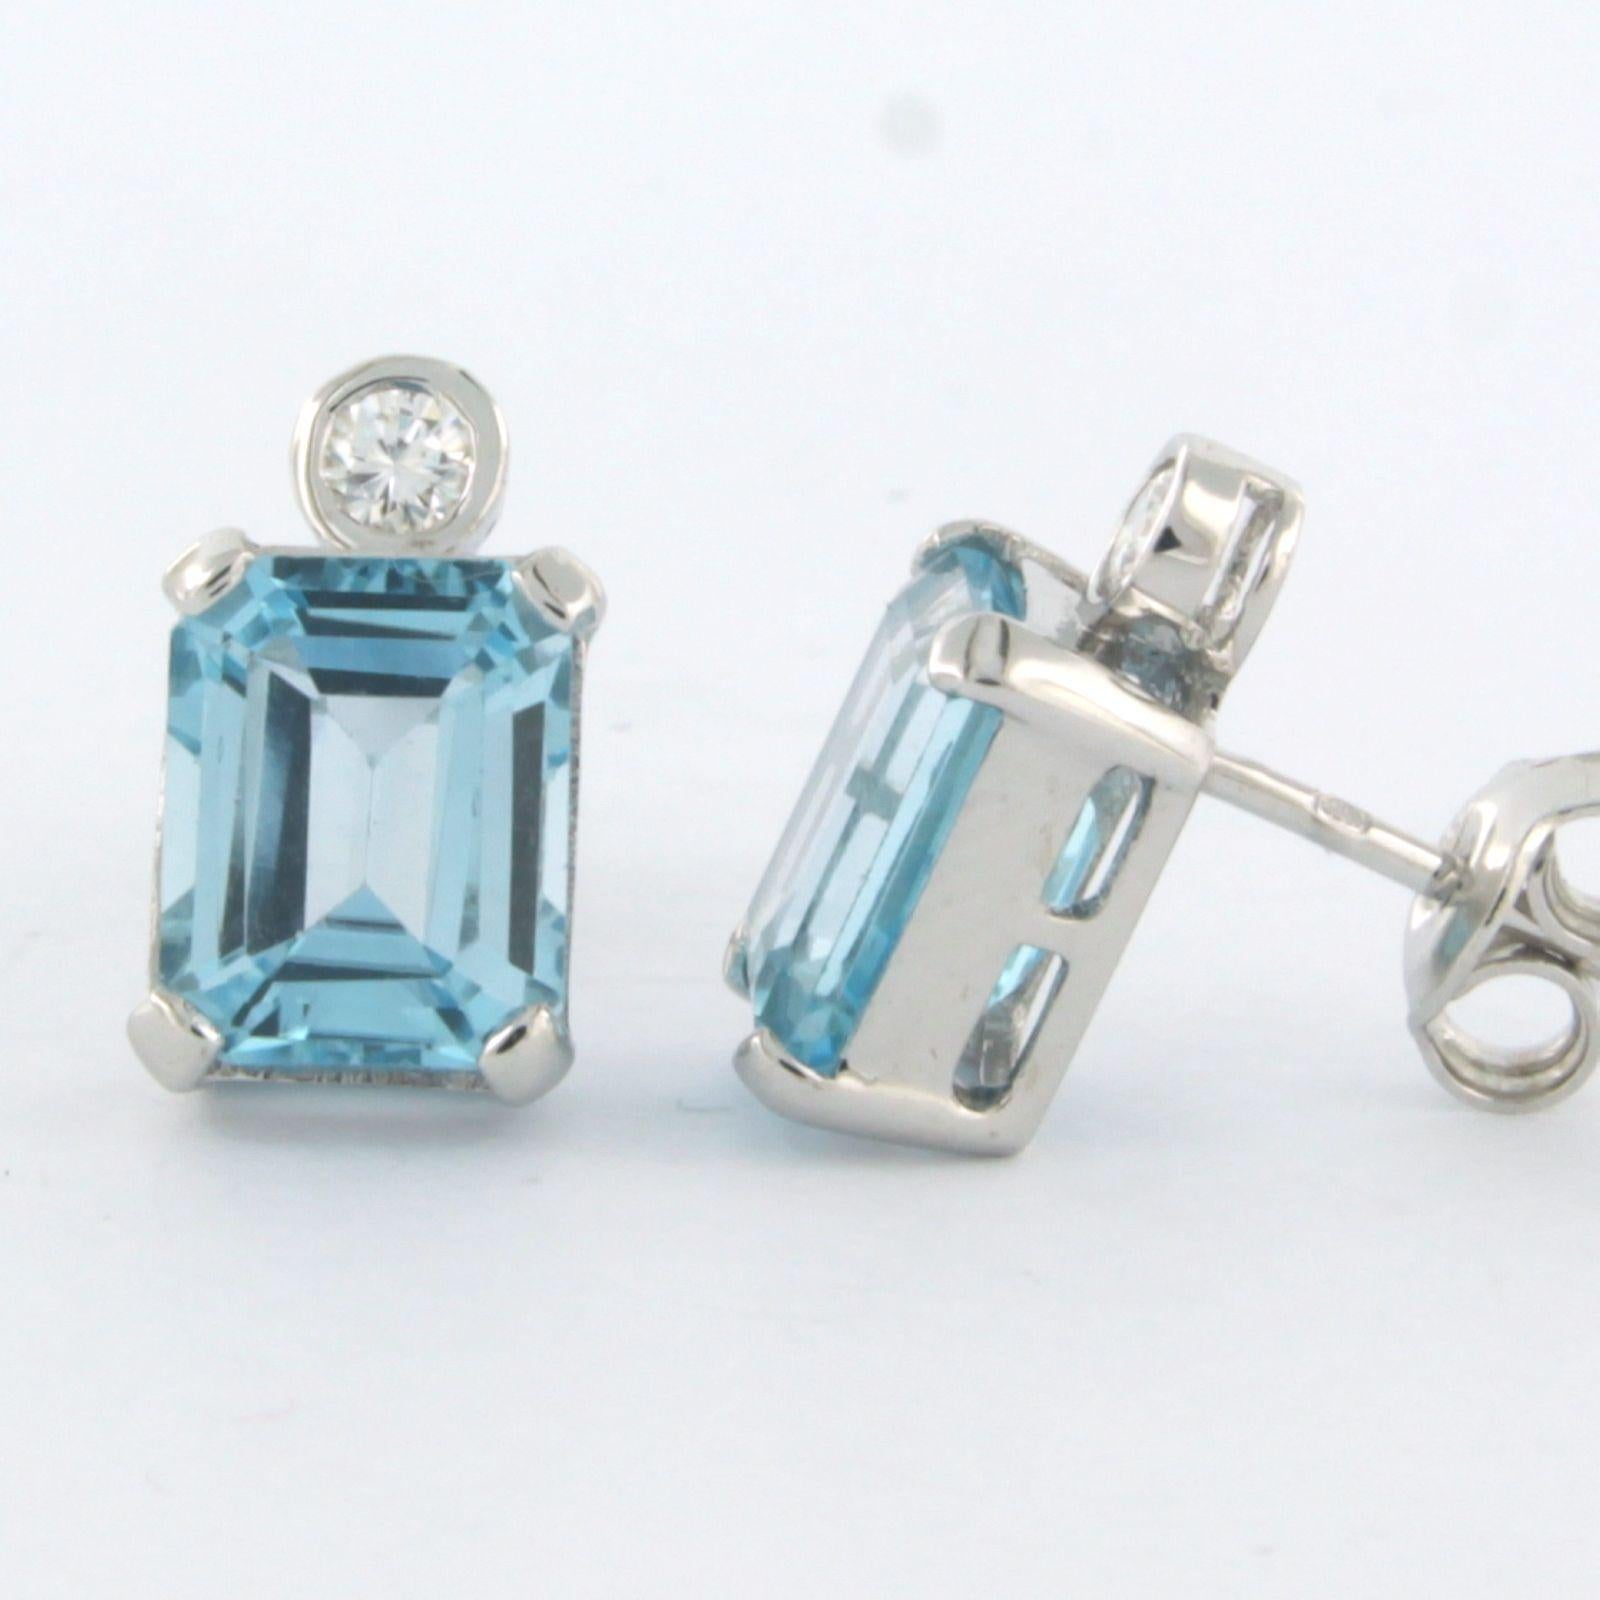 Modern Earrings set with topaz and diamonds 14k white gold